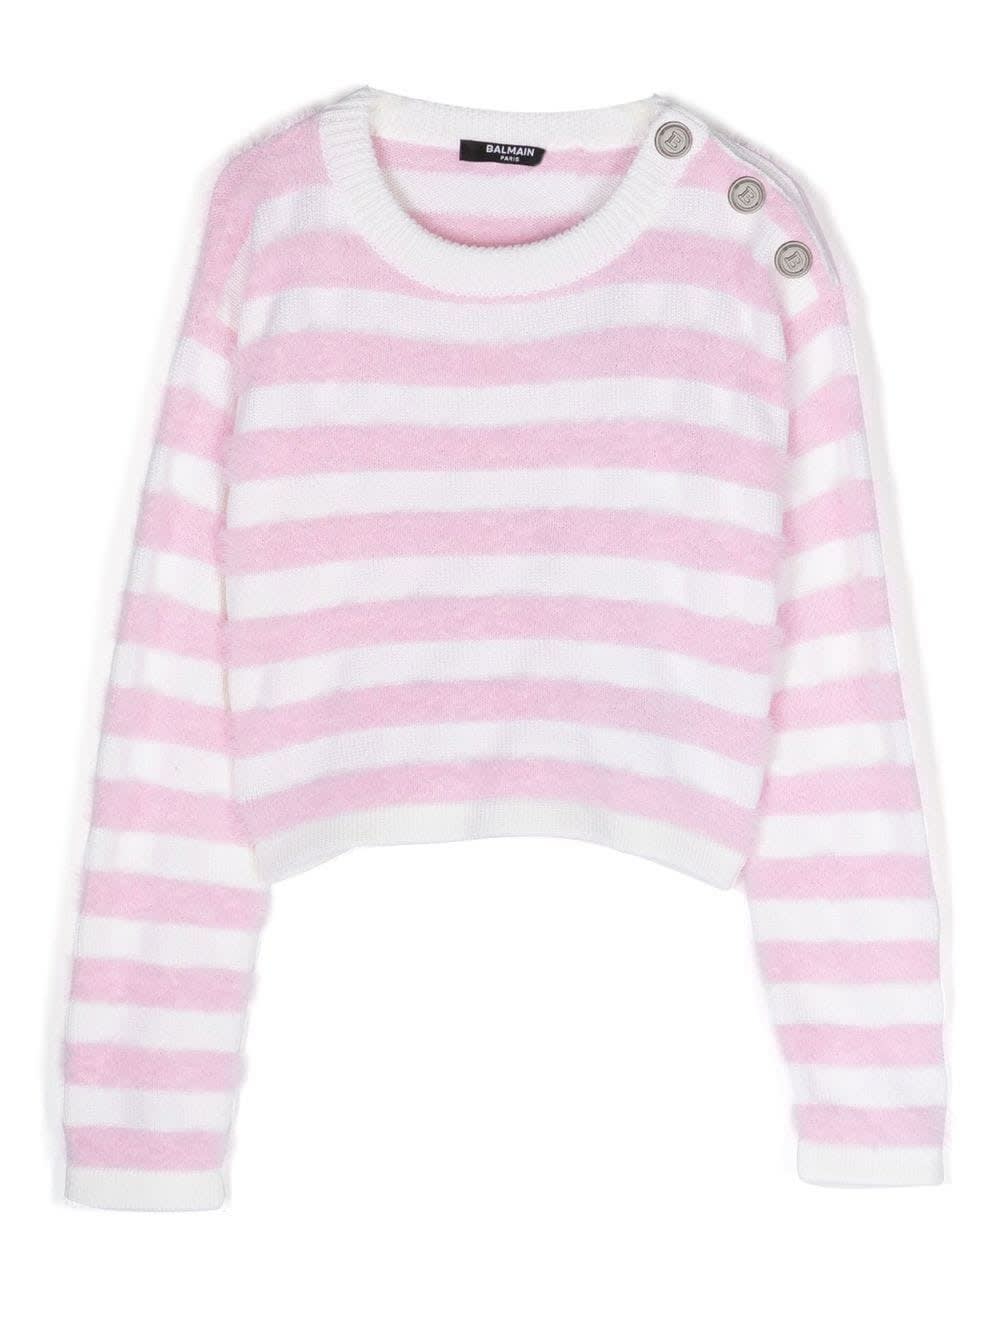 Balmain Kids Pink And White Striped Sweater With Silver Embossed Buttons